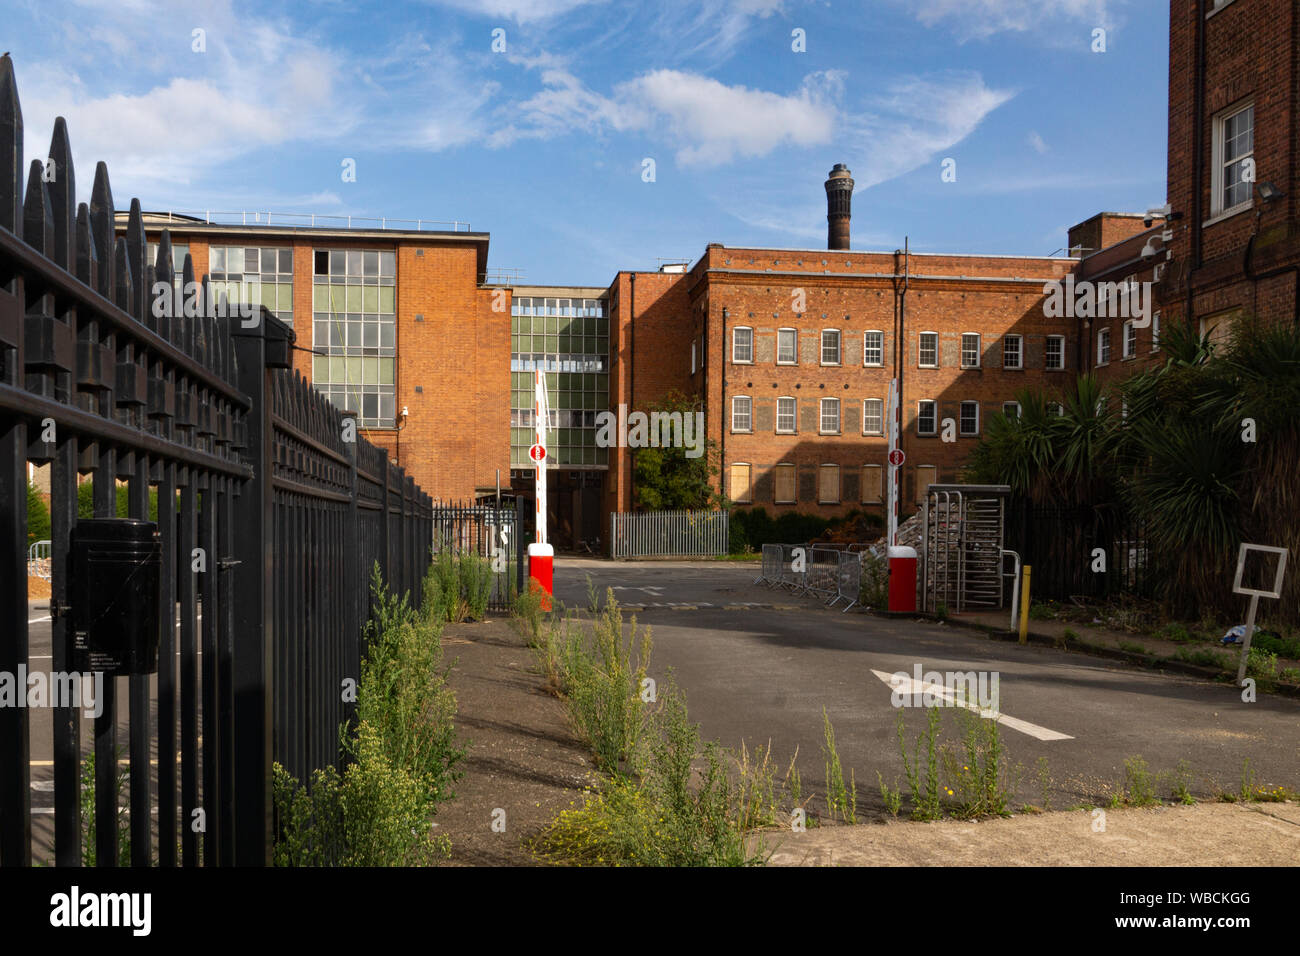 The Horlick's Factory, Slough, Berkshire, now decommissioned. The buildings and land bought by Berkley Homes in August 2018 and on track for renovation Stock Photo